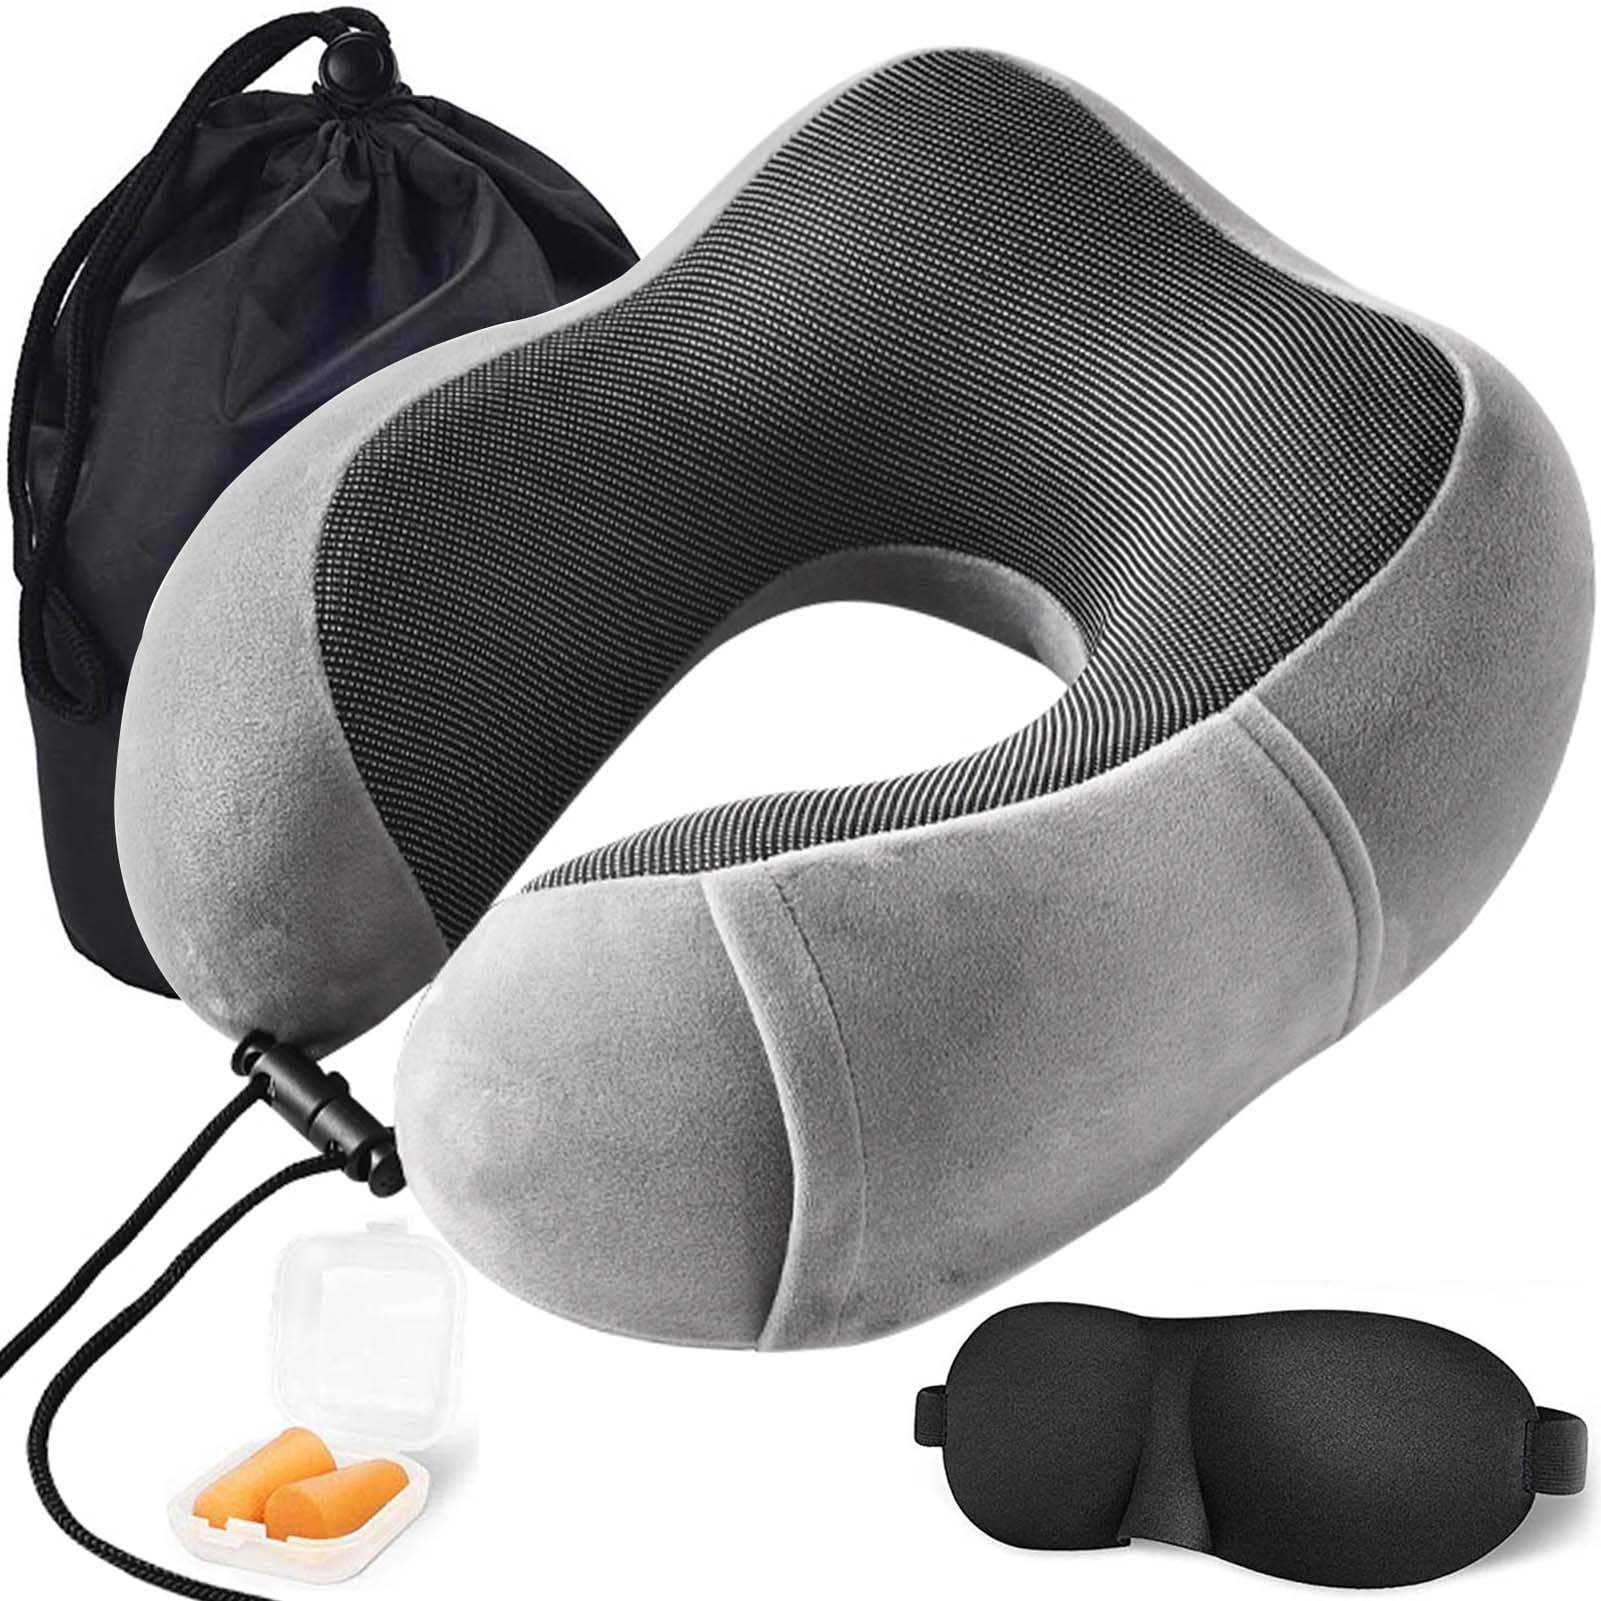 home and office Perfect for travel Raking Portable Neck Pillow with Eyeshade Carry Bag Comfortable U Shaped Neck Support Pillow Memory Foam Travel Pillow Earplugs 